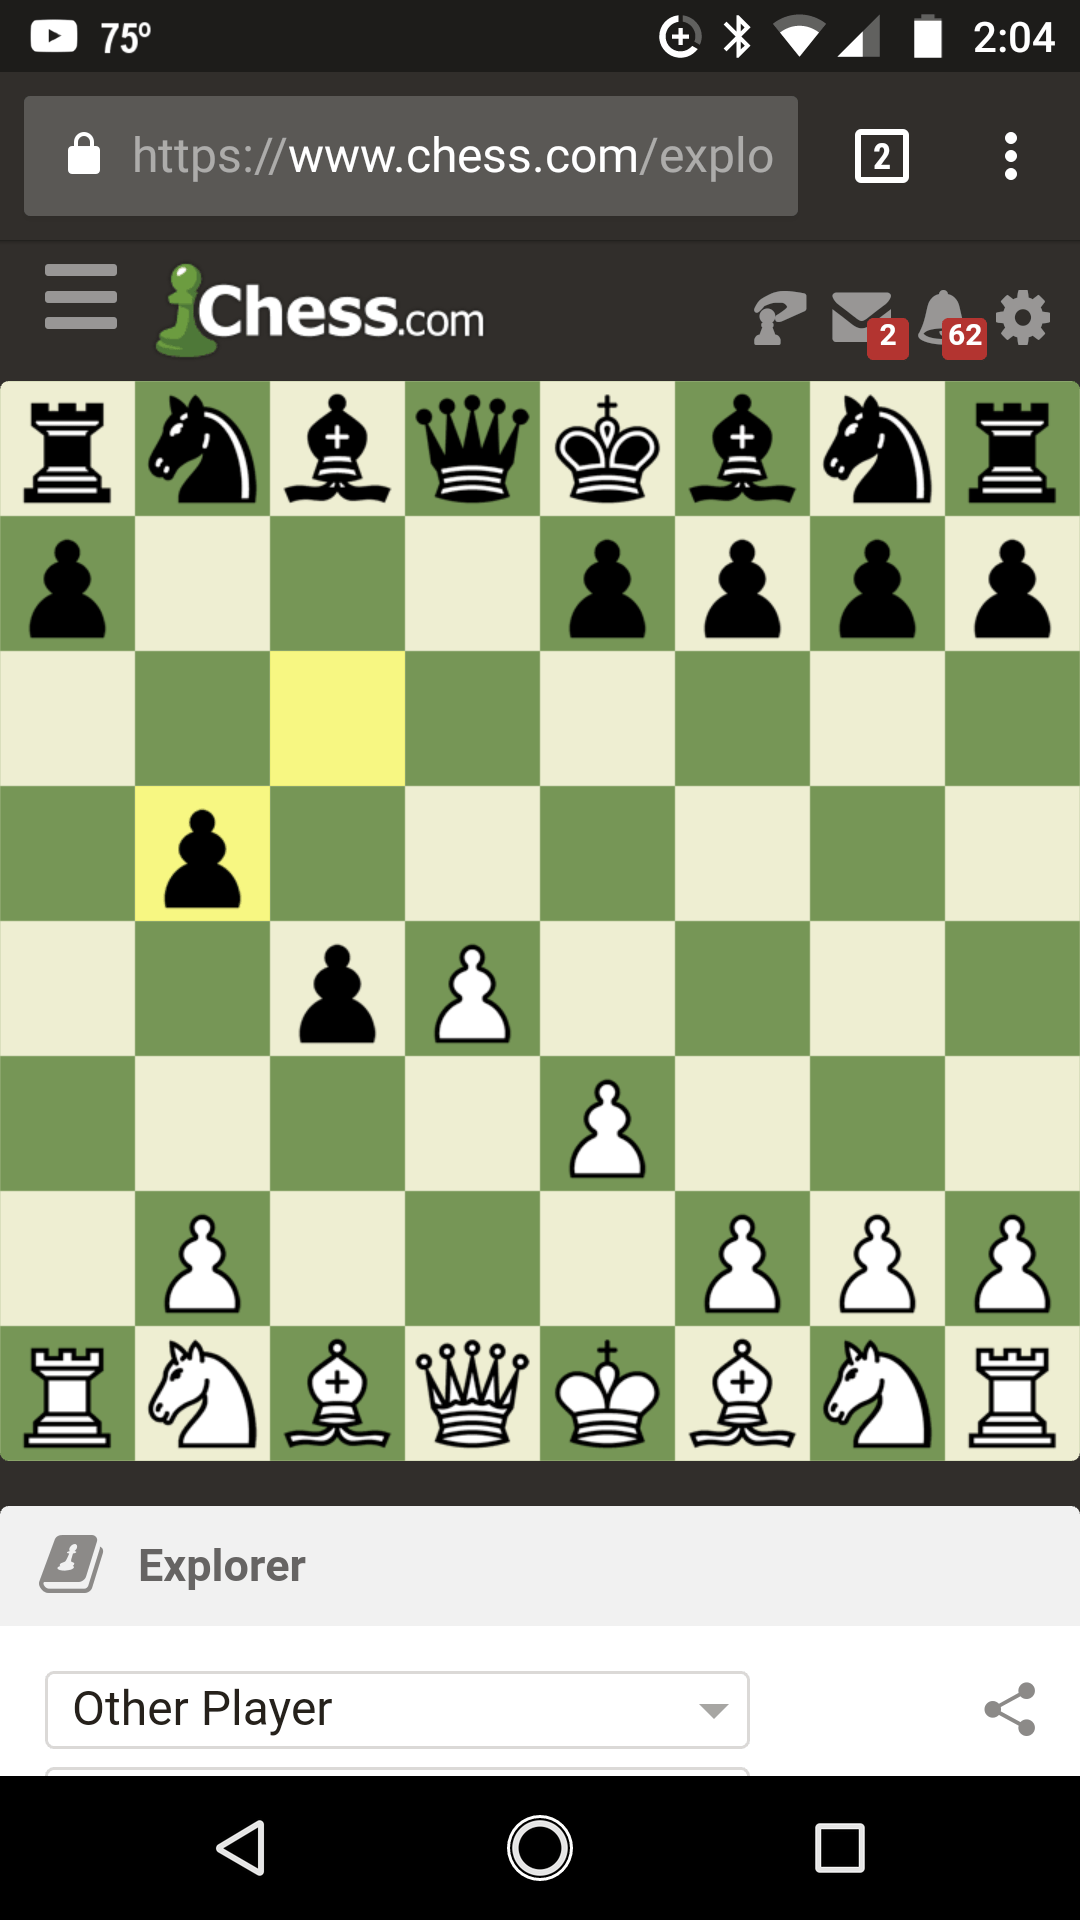 How do I get a PGN of my game? - Chess.com Member Support and FAQs